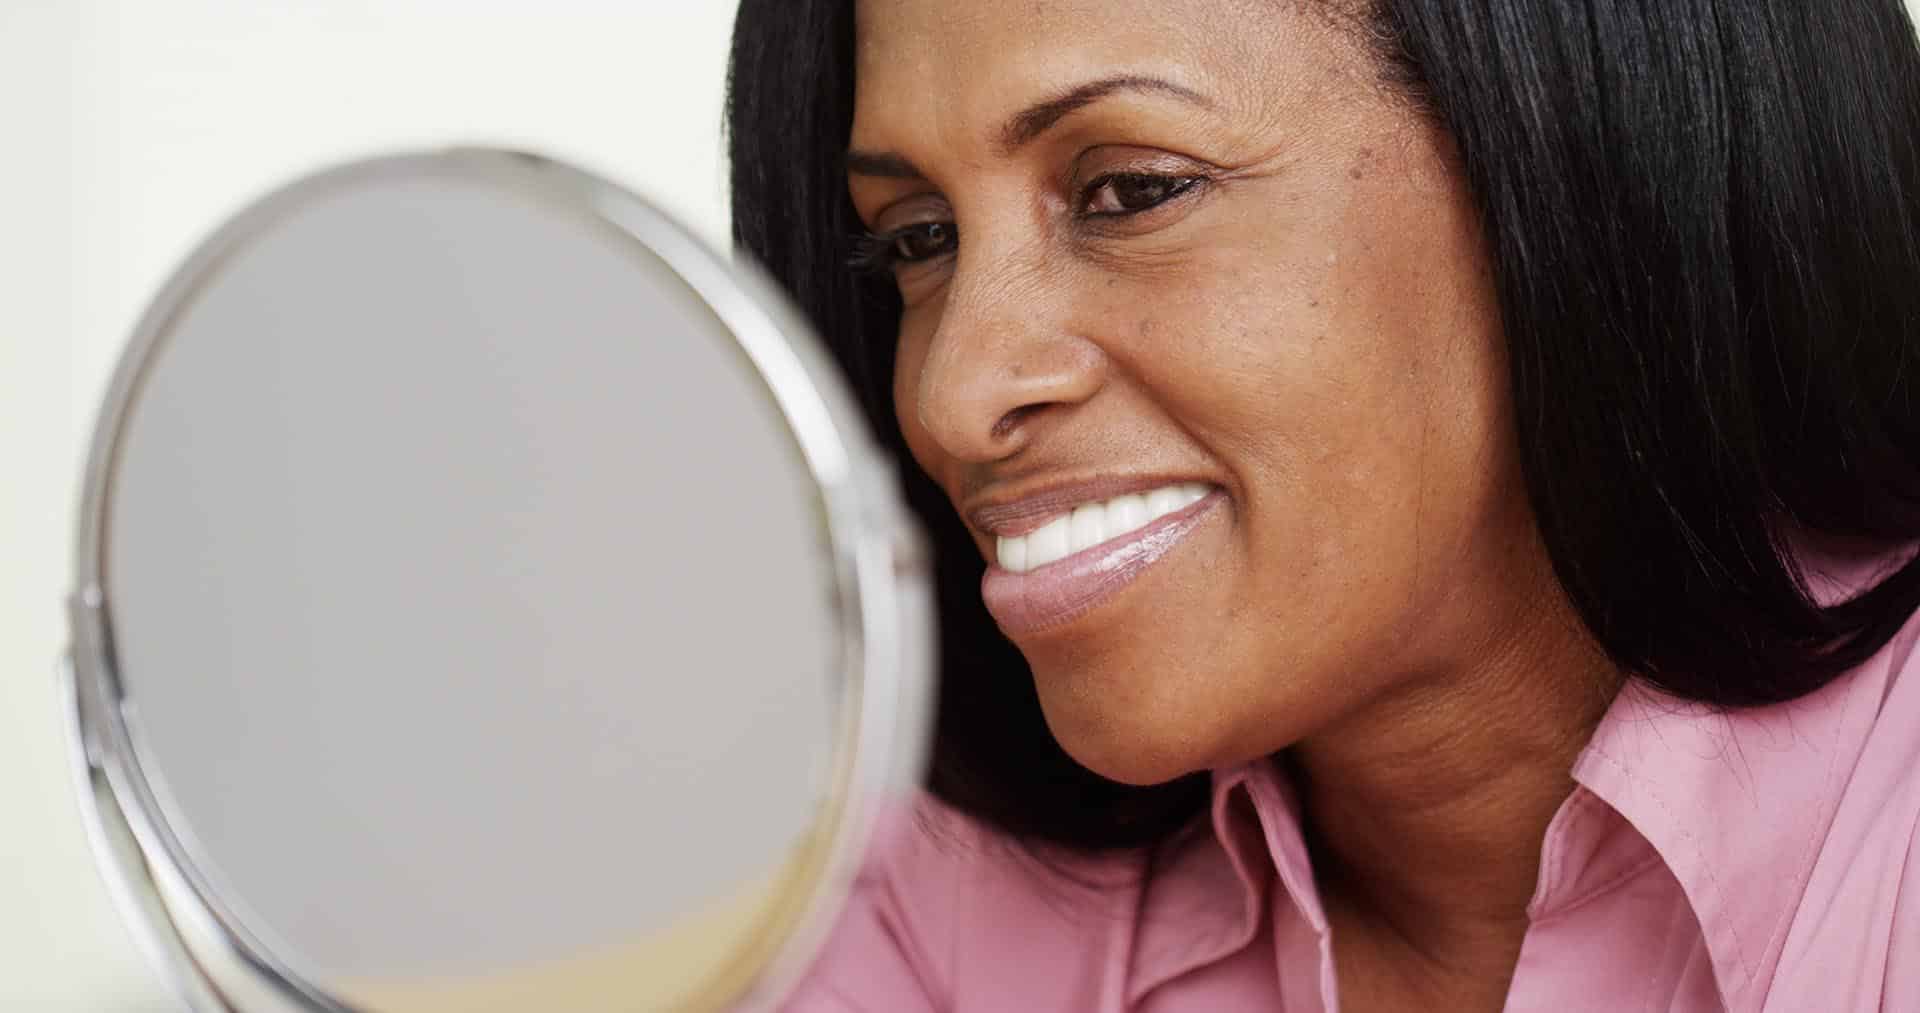 Woman admiring her new dentures in the mirror.